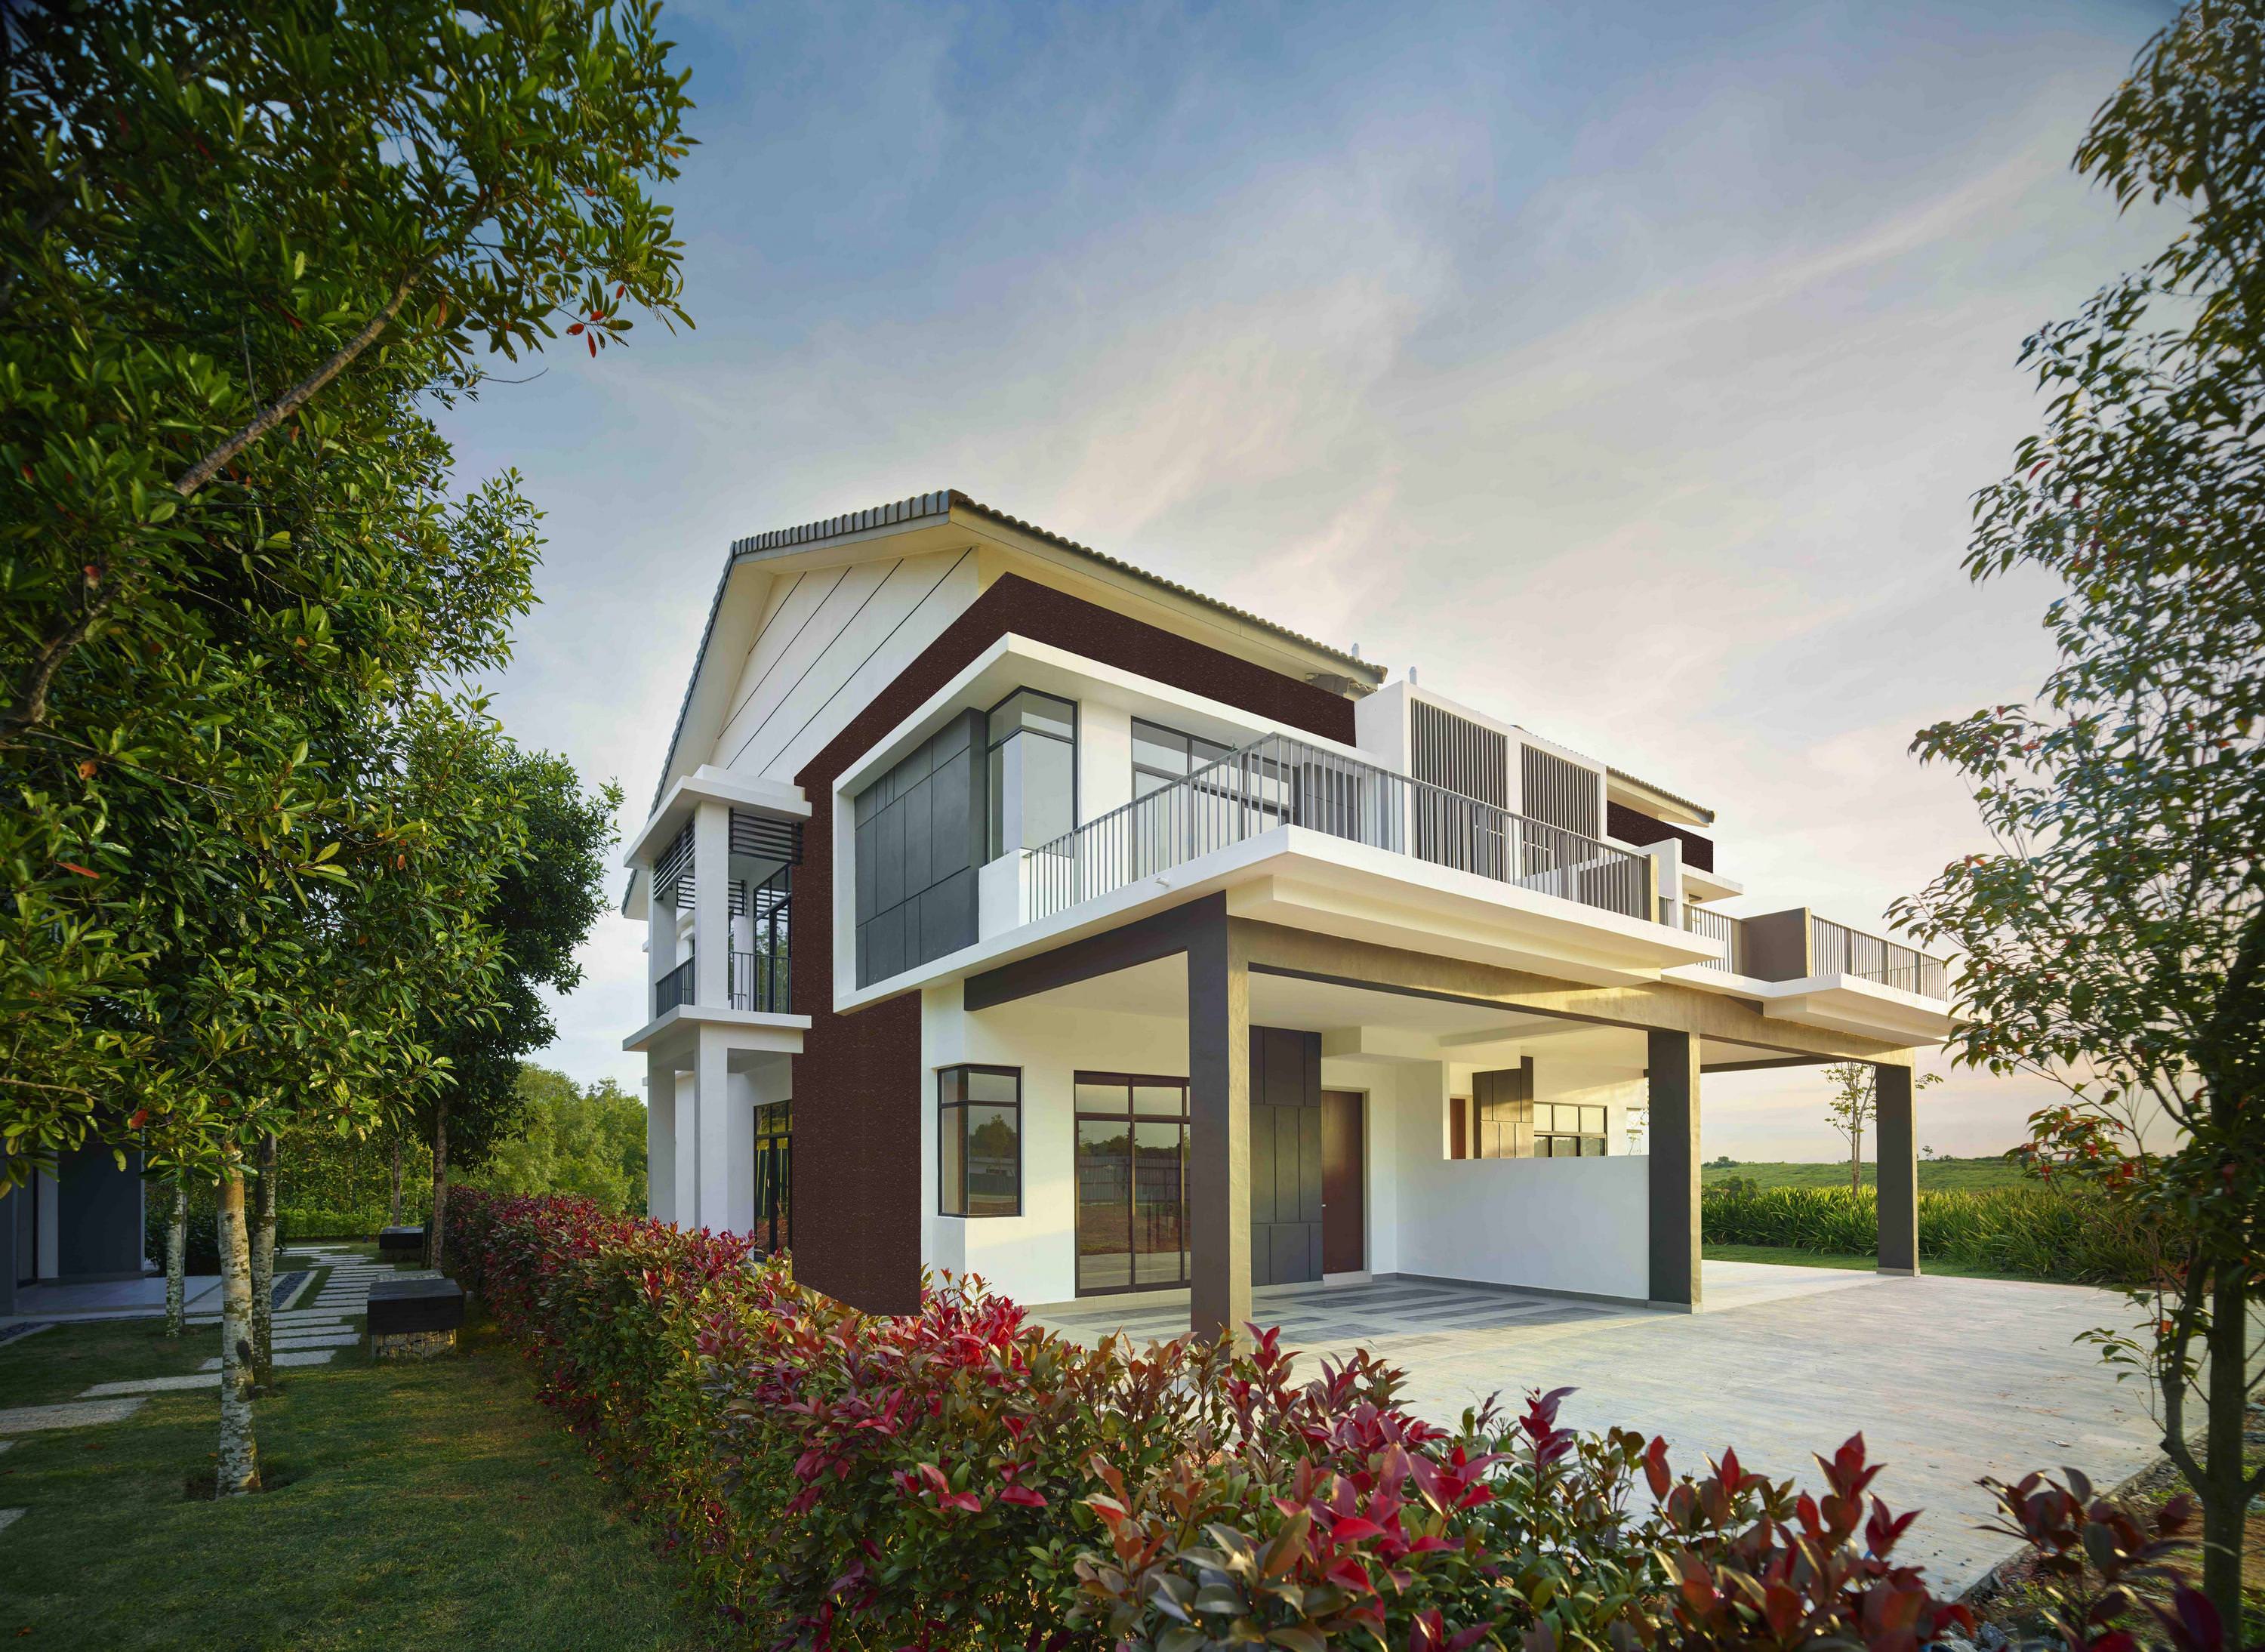 Find the best houses in Malaysia today